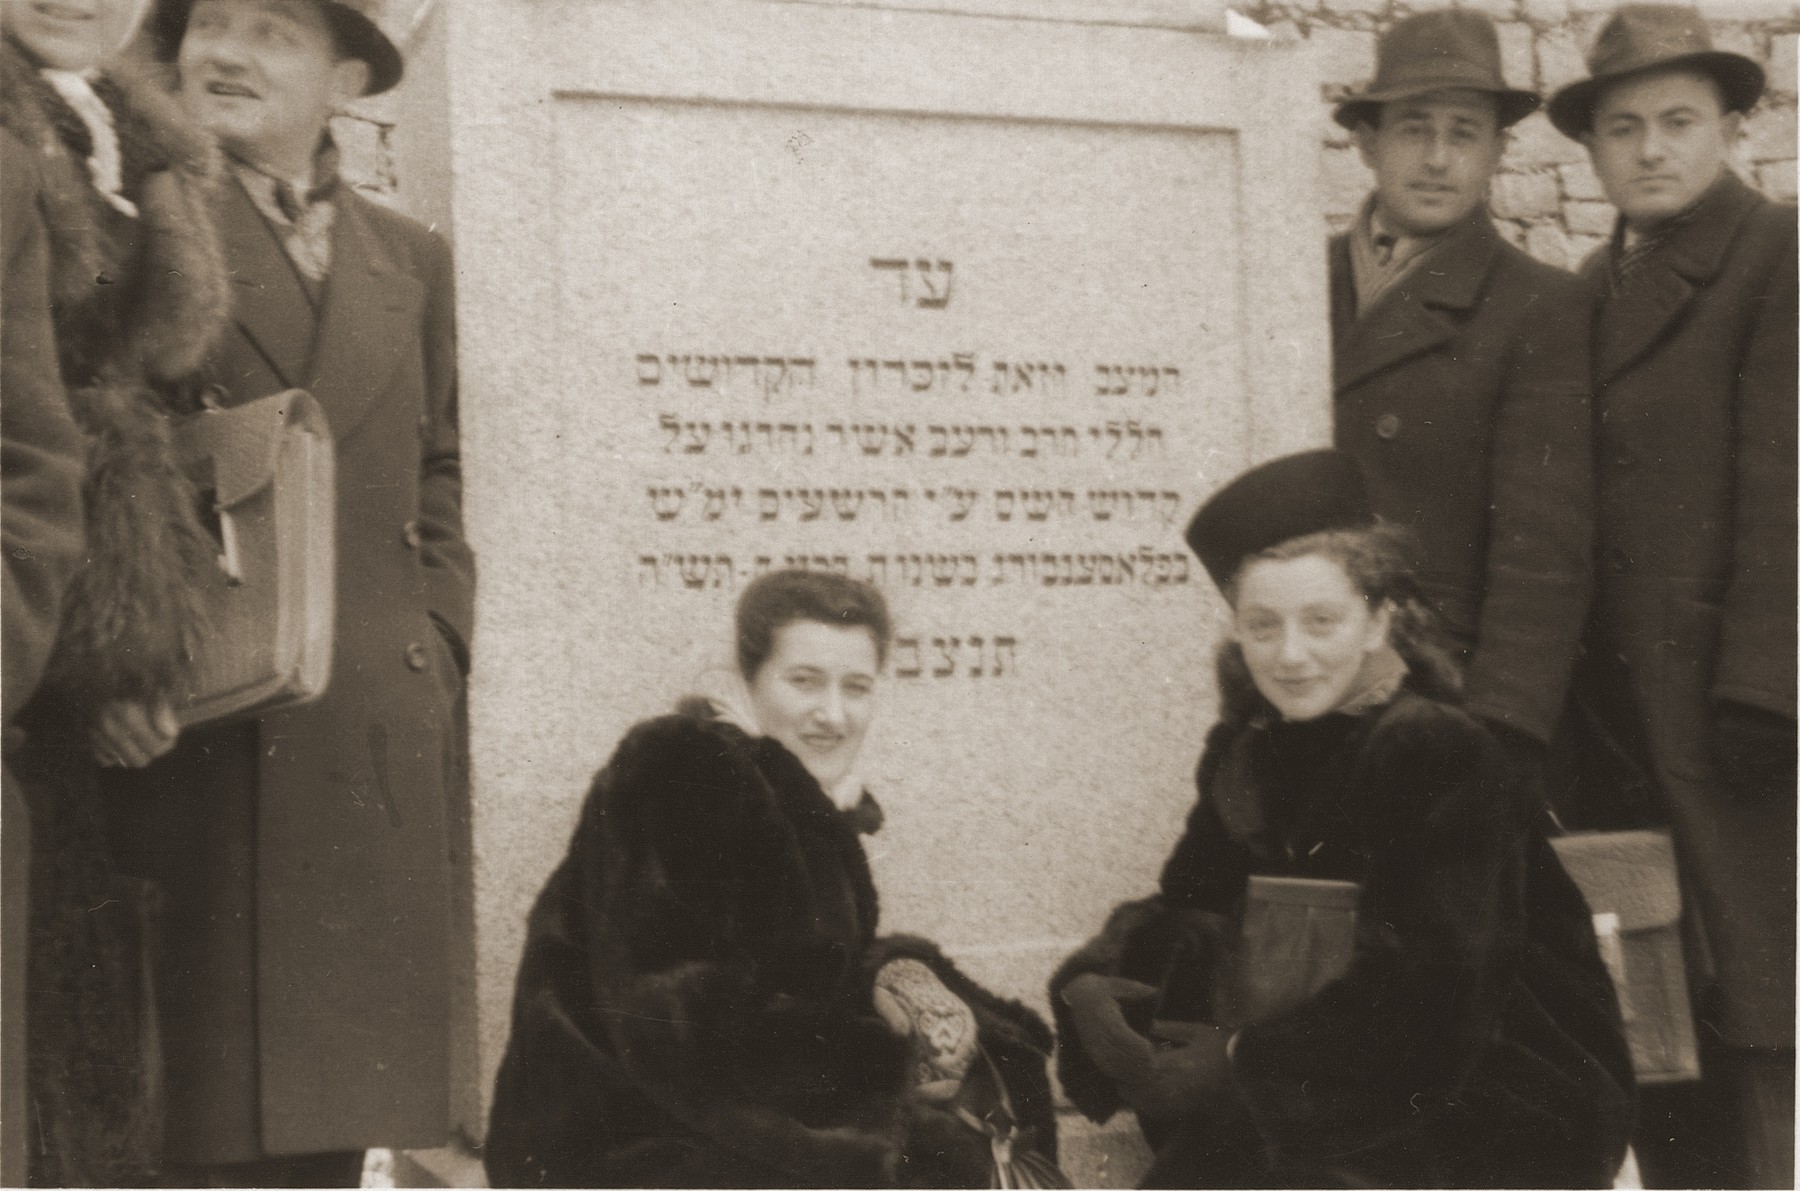 Hinda Chilewicz (left) and Sala Weingarten view a memorial for Jewish victims at the Flossenbuerg concentration camp.